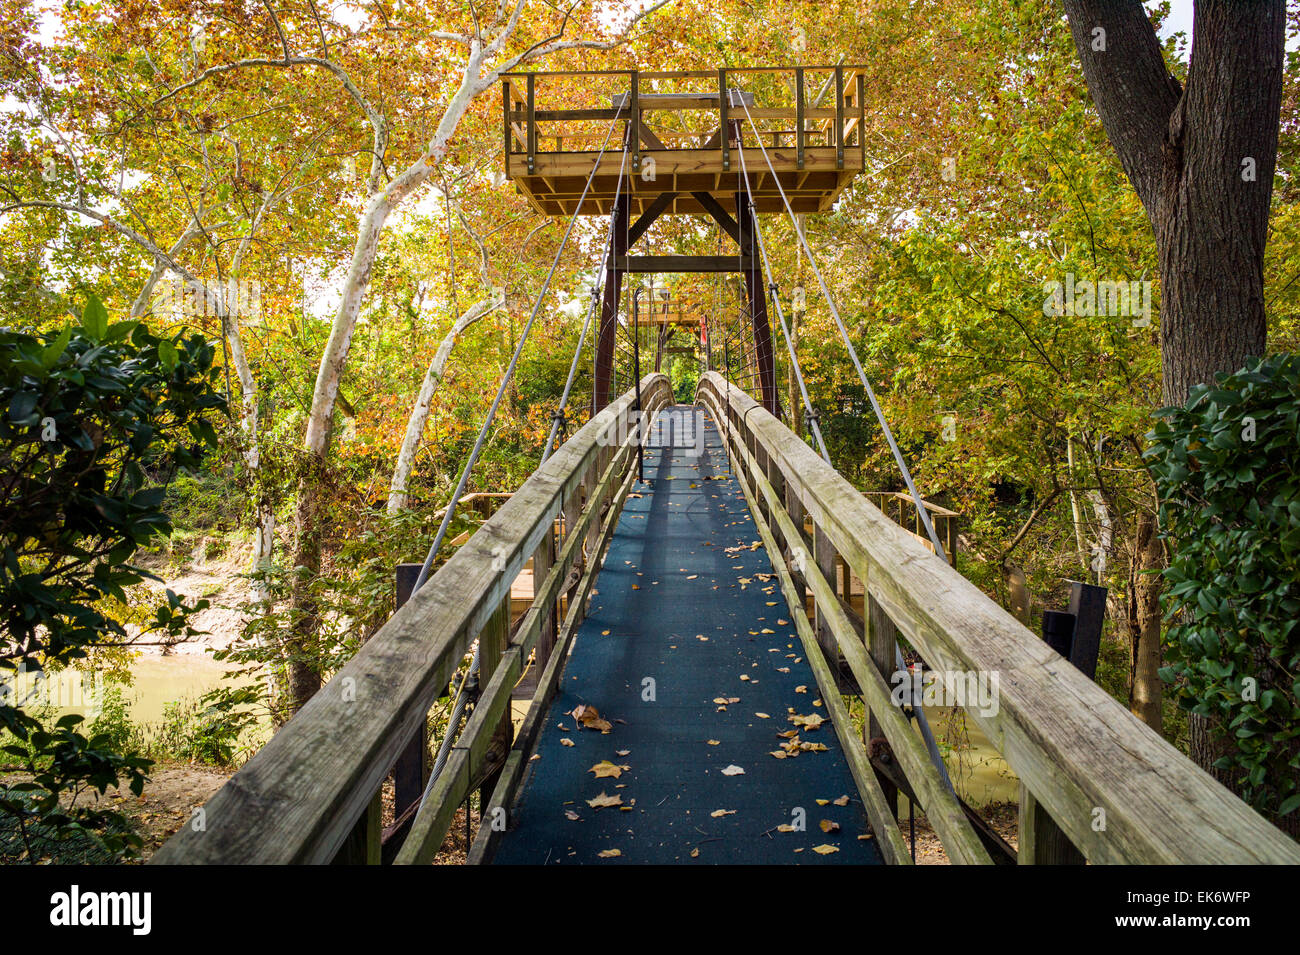 Foot bridge, Bayou Bend gardens & home, Museum of Fine Arts Houston, house museum for American decorative arts and paintings. Stock Photo